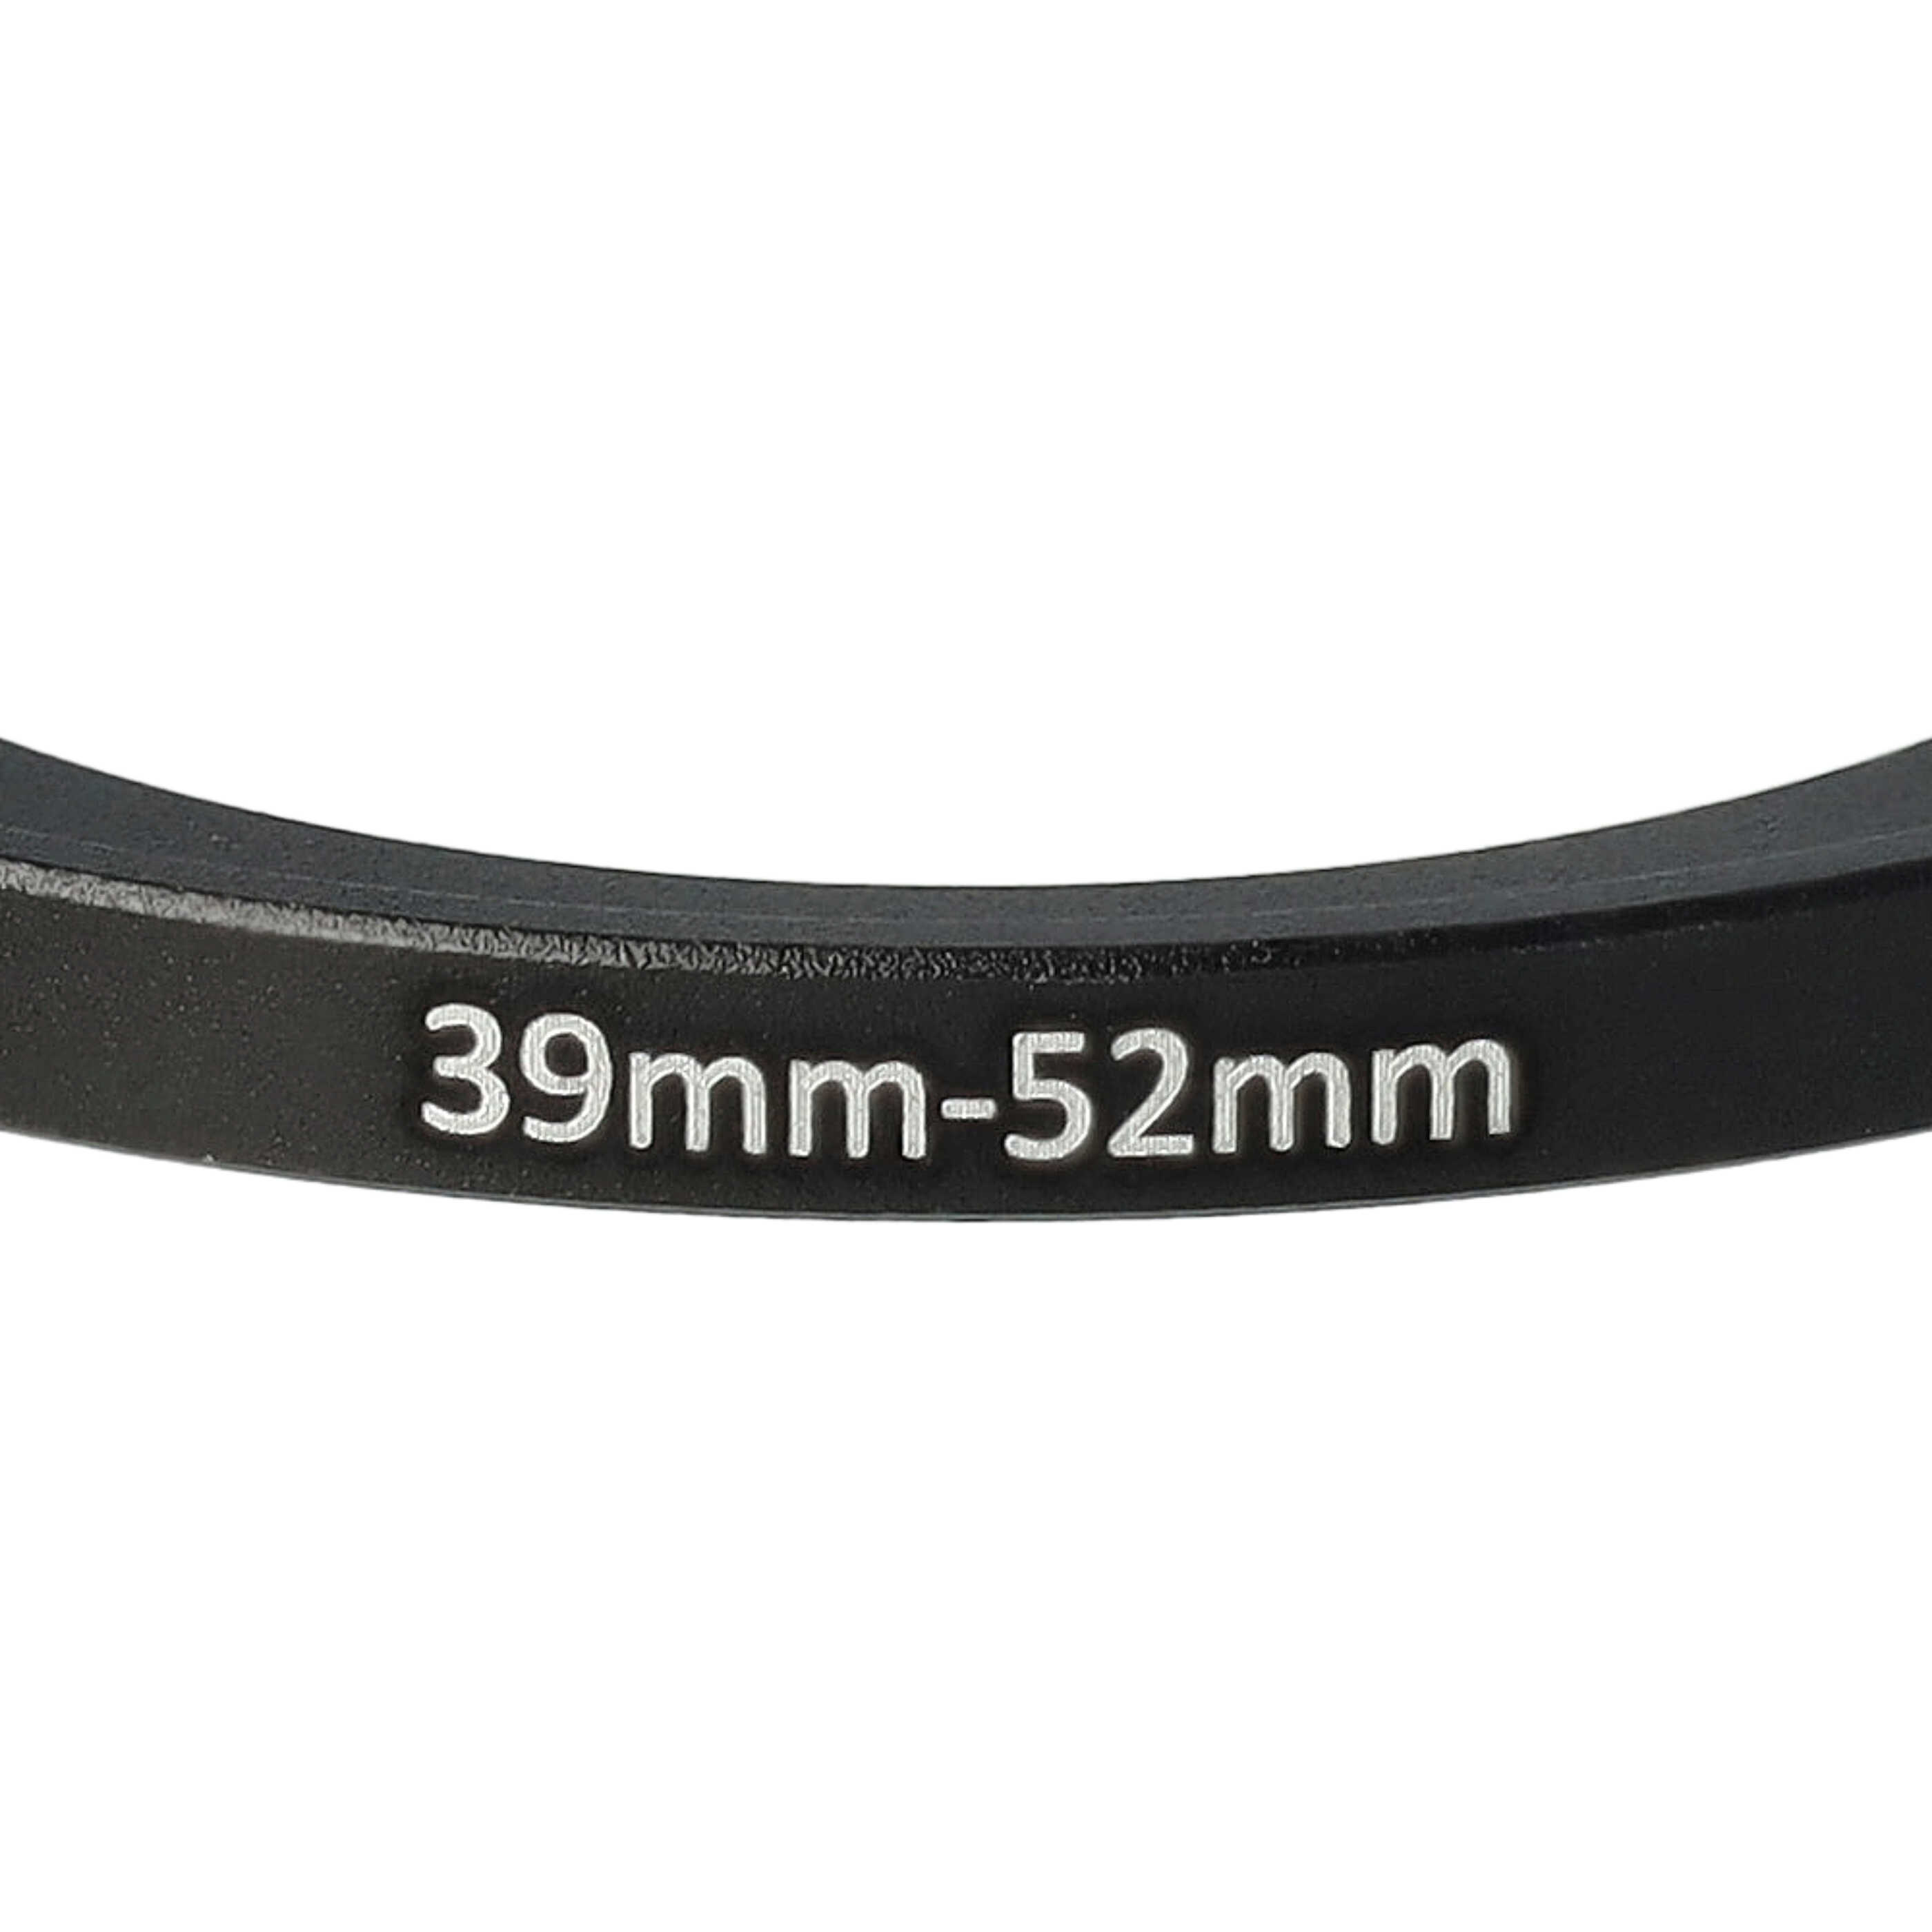 Step-Up Ring Adapter of 39 mm to 52 mmfor various Camera Lens - Filter Adapter